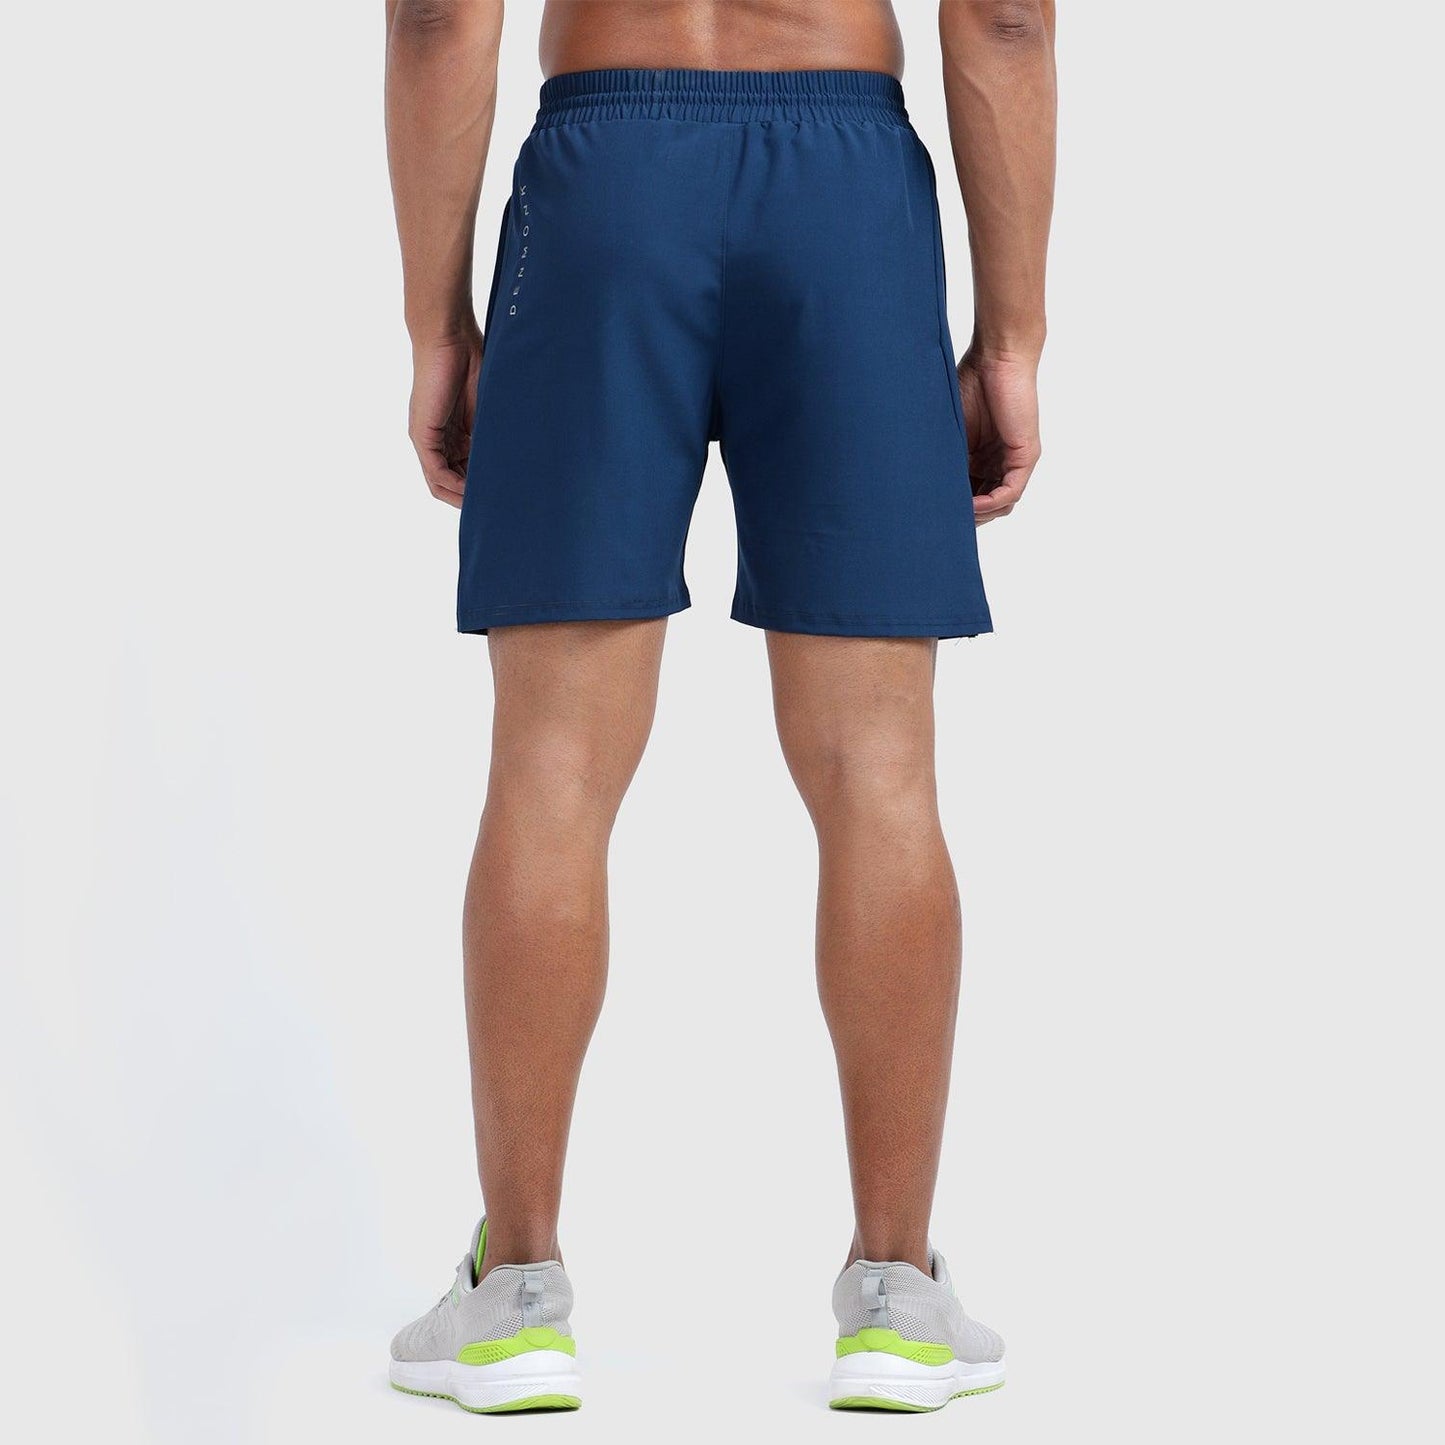 Denmonk's fashionable Coastline Comfort regal blue for men will boost your level of gym fitness.